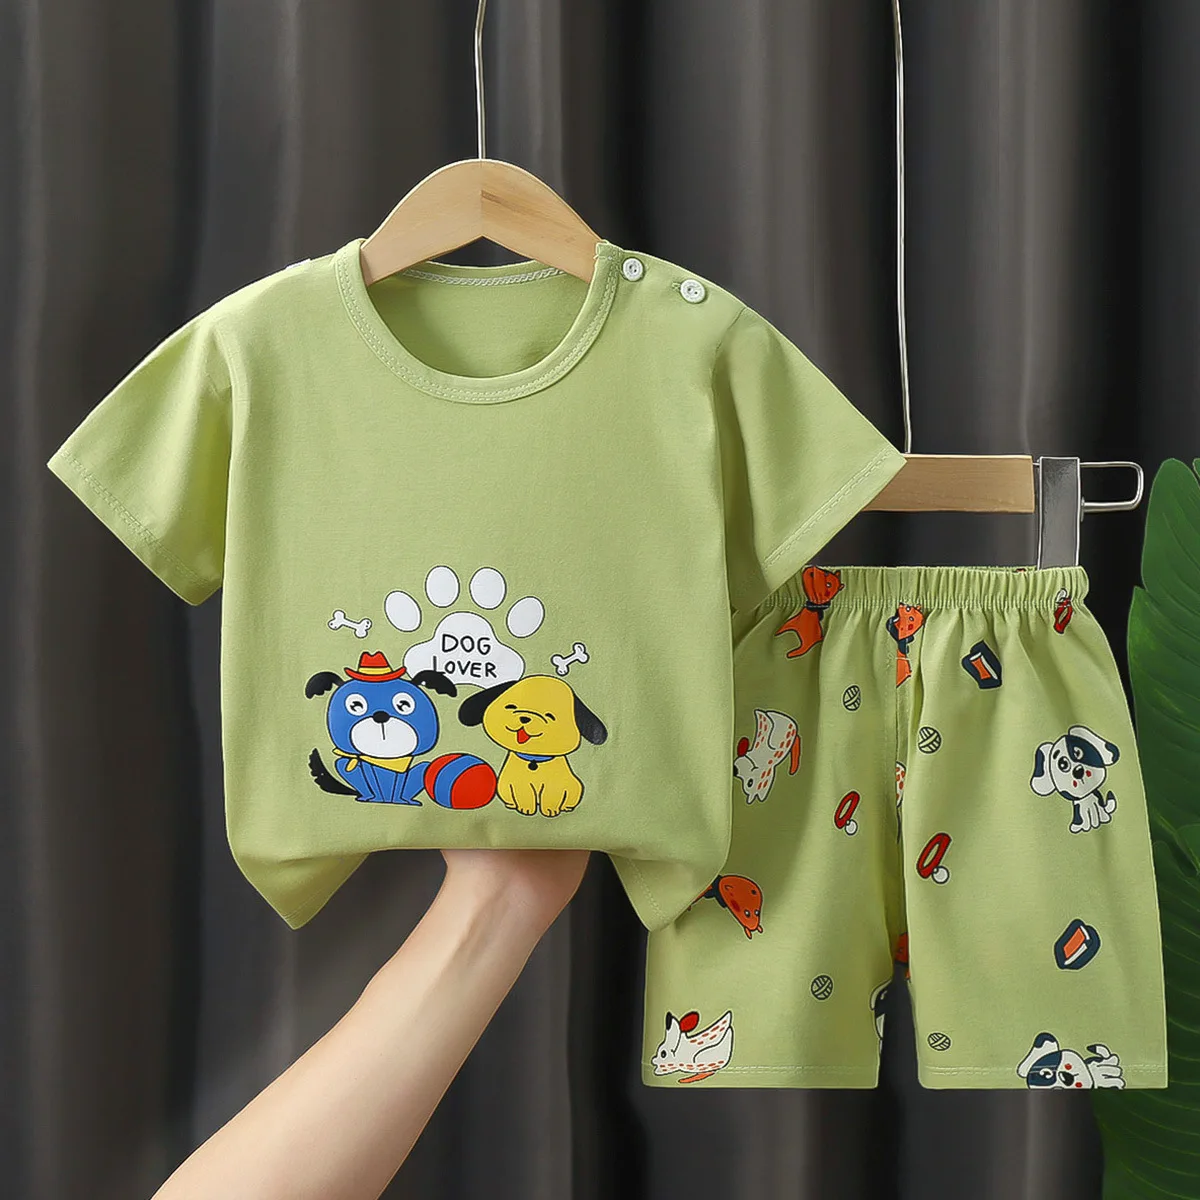 

New 2pc/set Baby Summer Clothes brand Children's Tracksuit Short Sleeved Suit Girls Boys T-shirt + Shorts Outfits for 0-7 Age